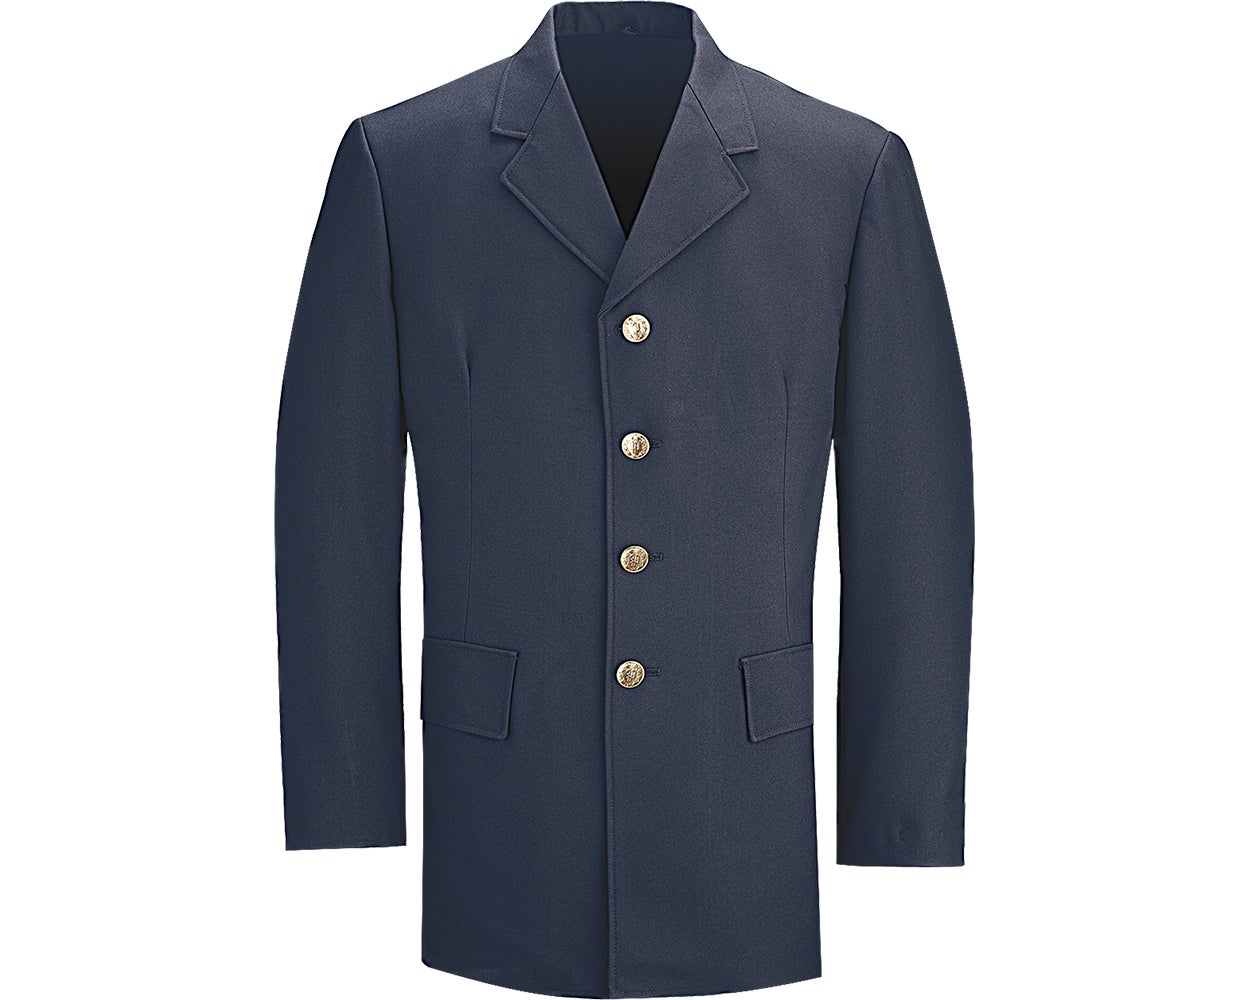 Flying Cross COMMAND 100% POLYESTER MENS SINGLE BREASTED DRESS COAT - F1 38803